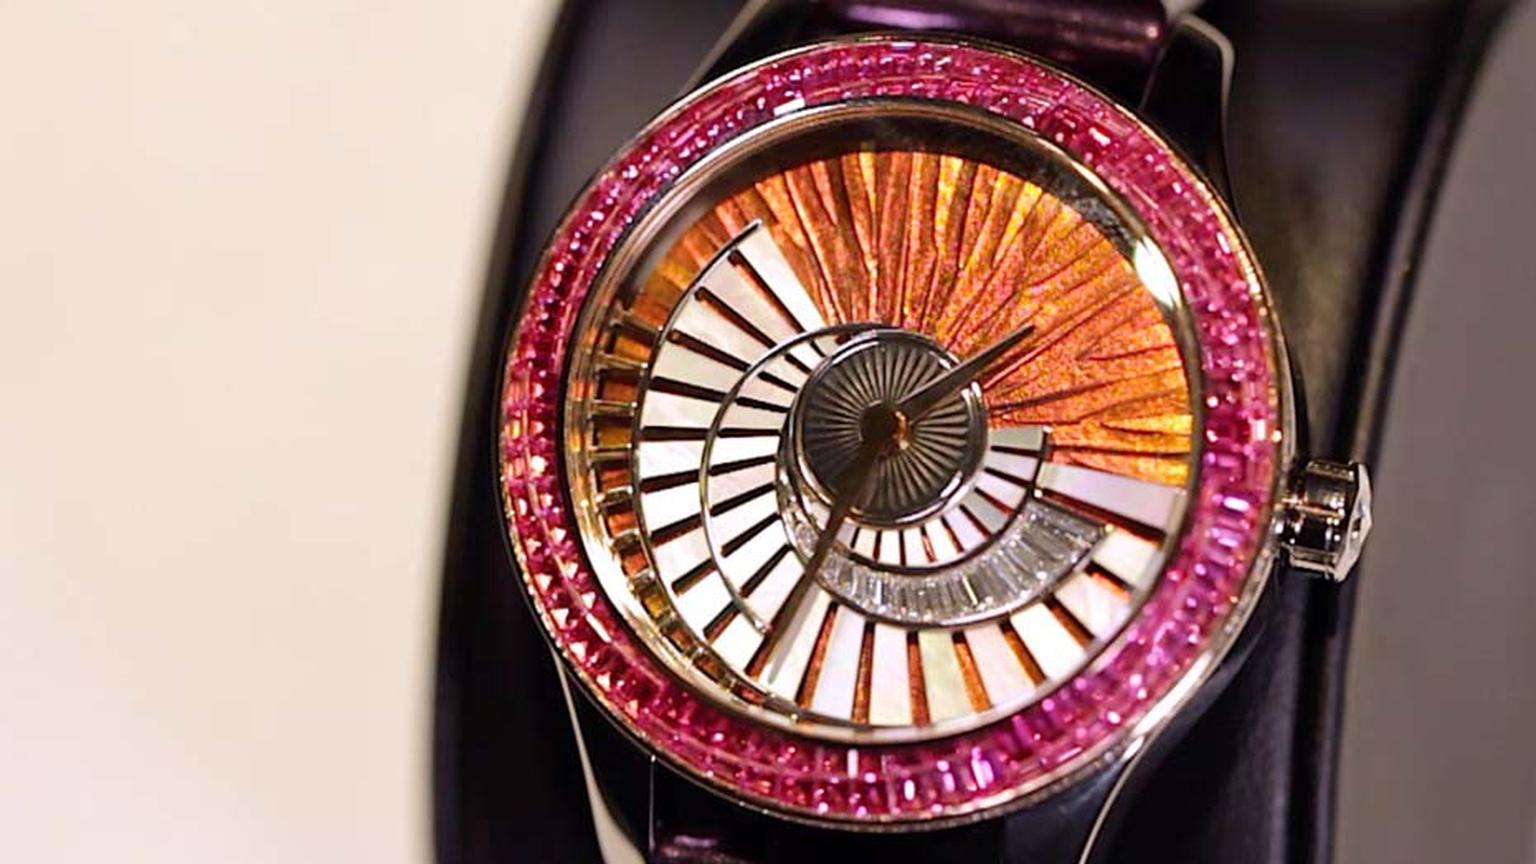 Dior’s new VIII Grand Bal Envol ladies' watches pay tribute to Monsieur Dior’s 1948 Spring-Summer collection and Envol couture line. This colourful model is set with pink spinels on the bezel and scarab wings on the dial.